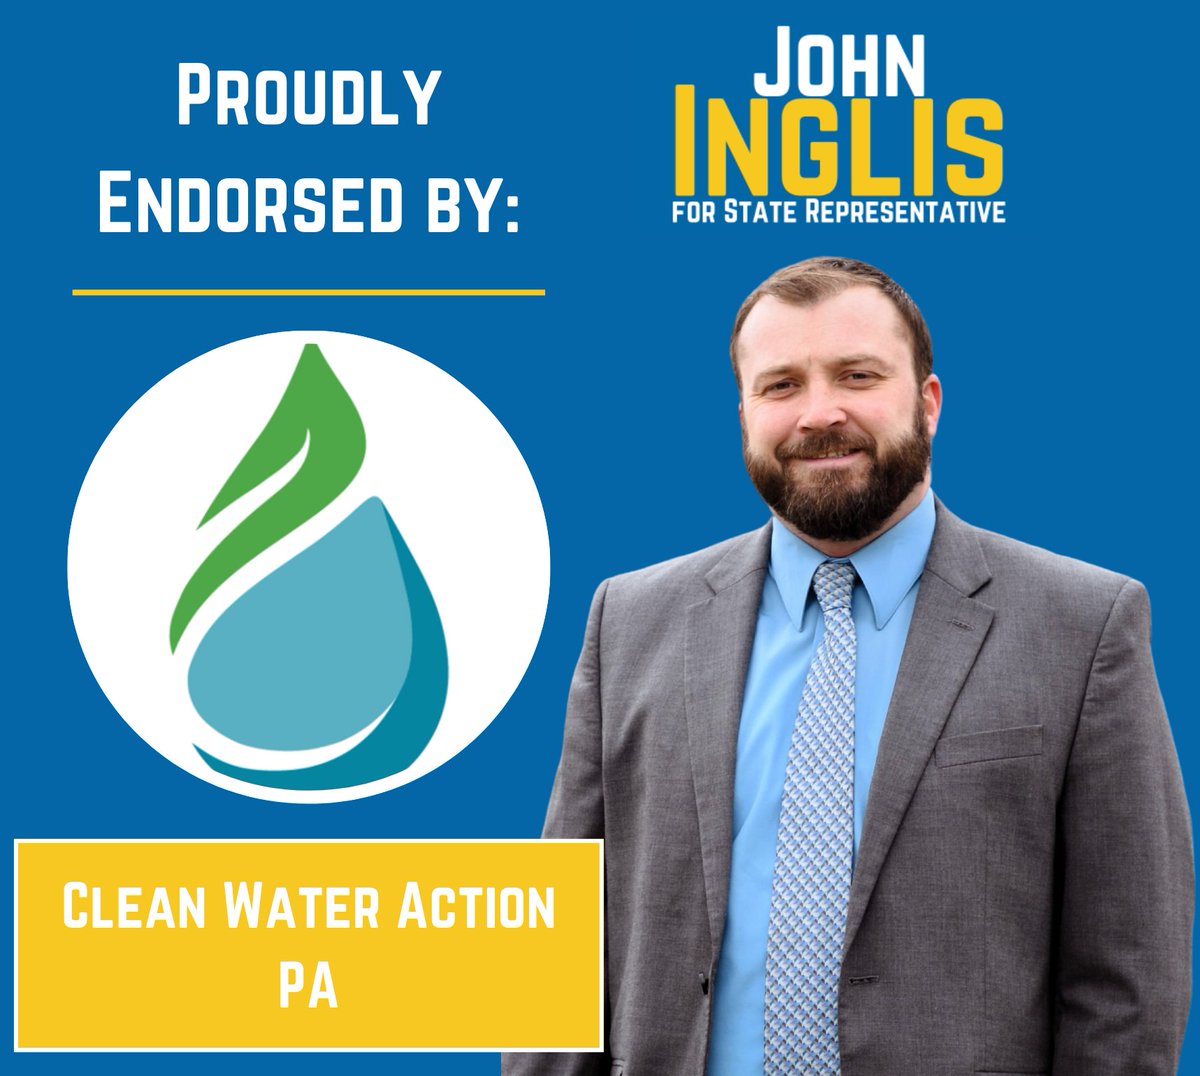 Thank you @CleanH2OPA for your endorsement! We are blessed to live in a region with so many waterways. We should all be able to enjoy those waterways and source clean drinking water from them. Our natural resources make us stronger.